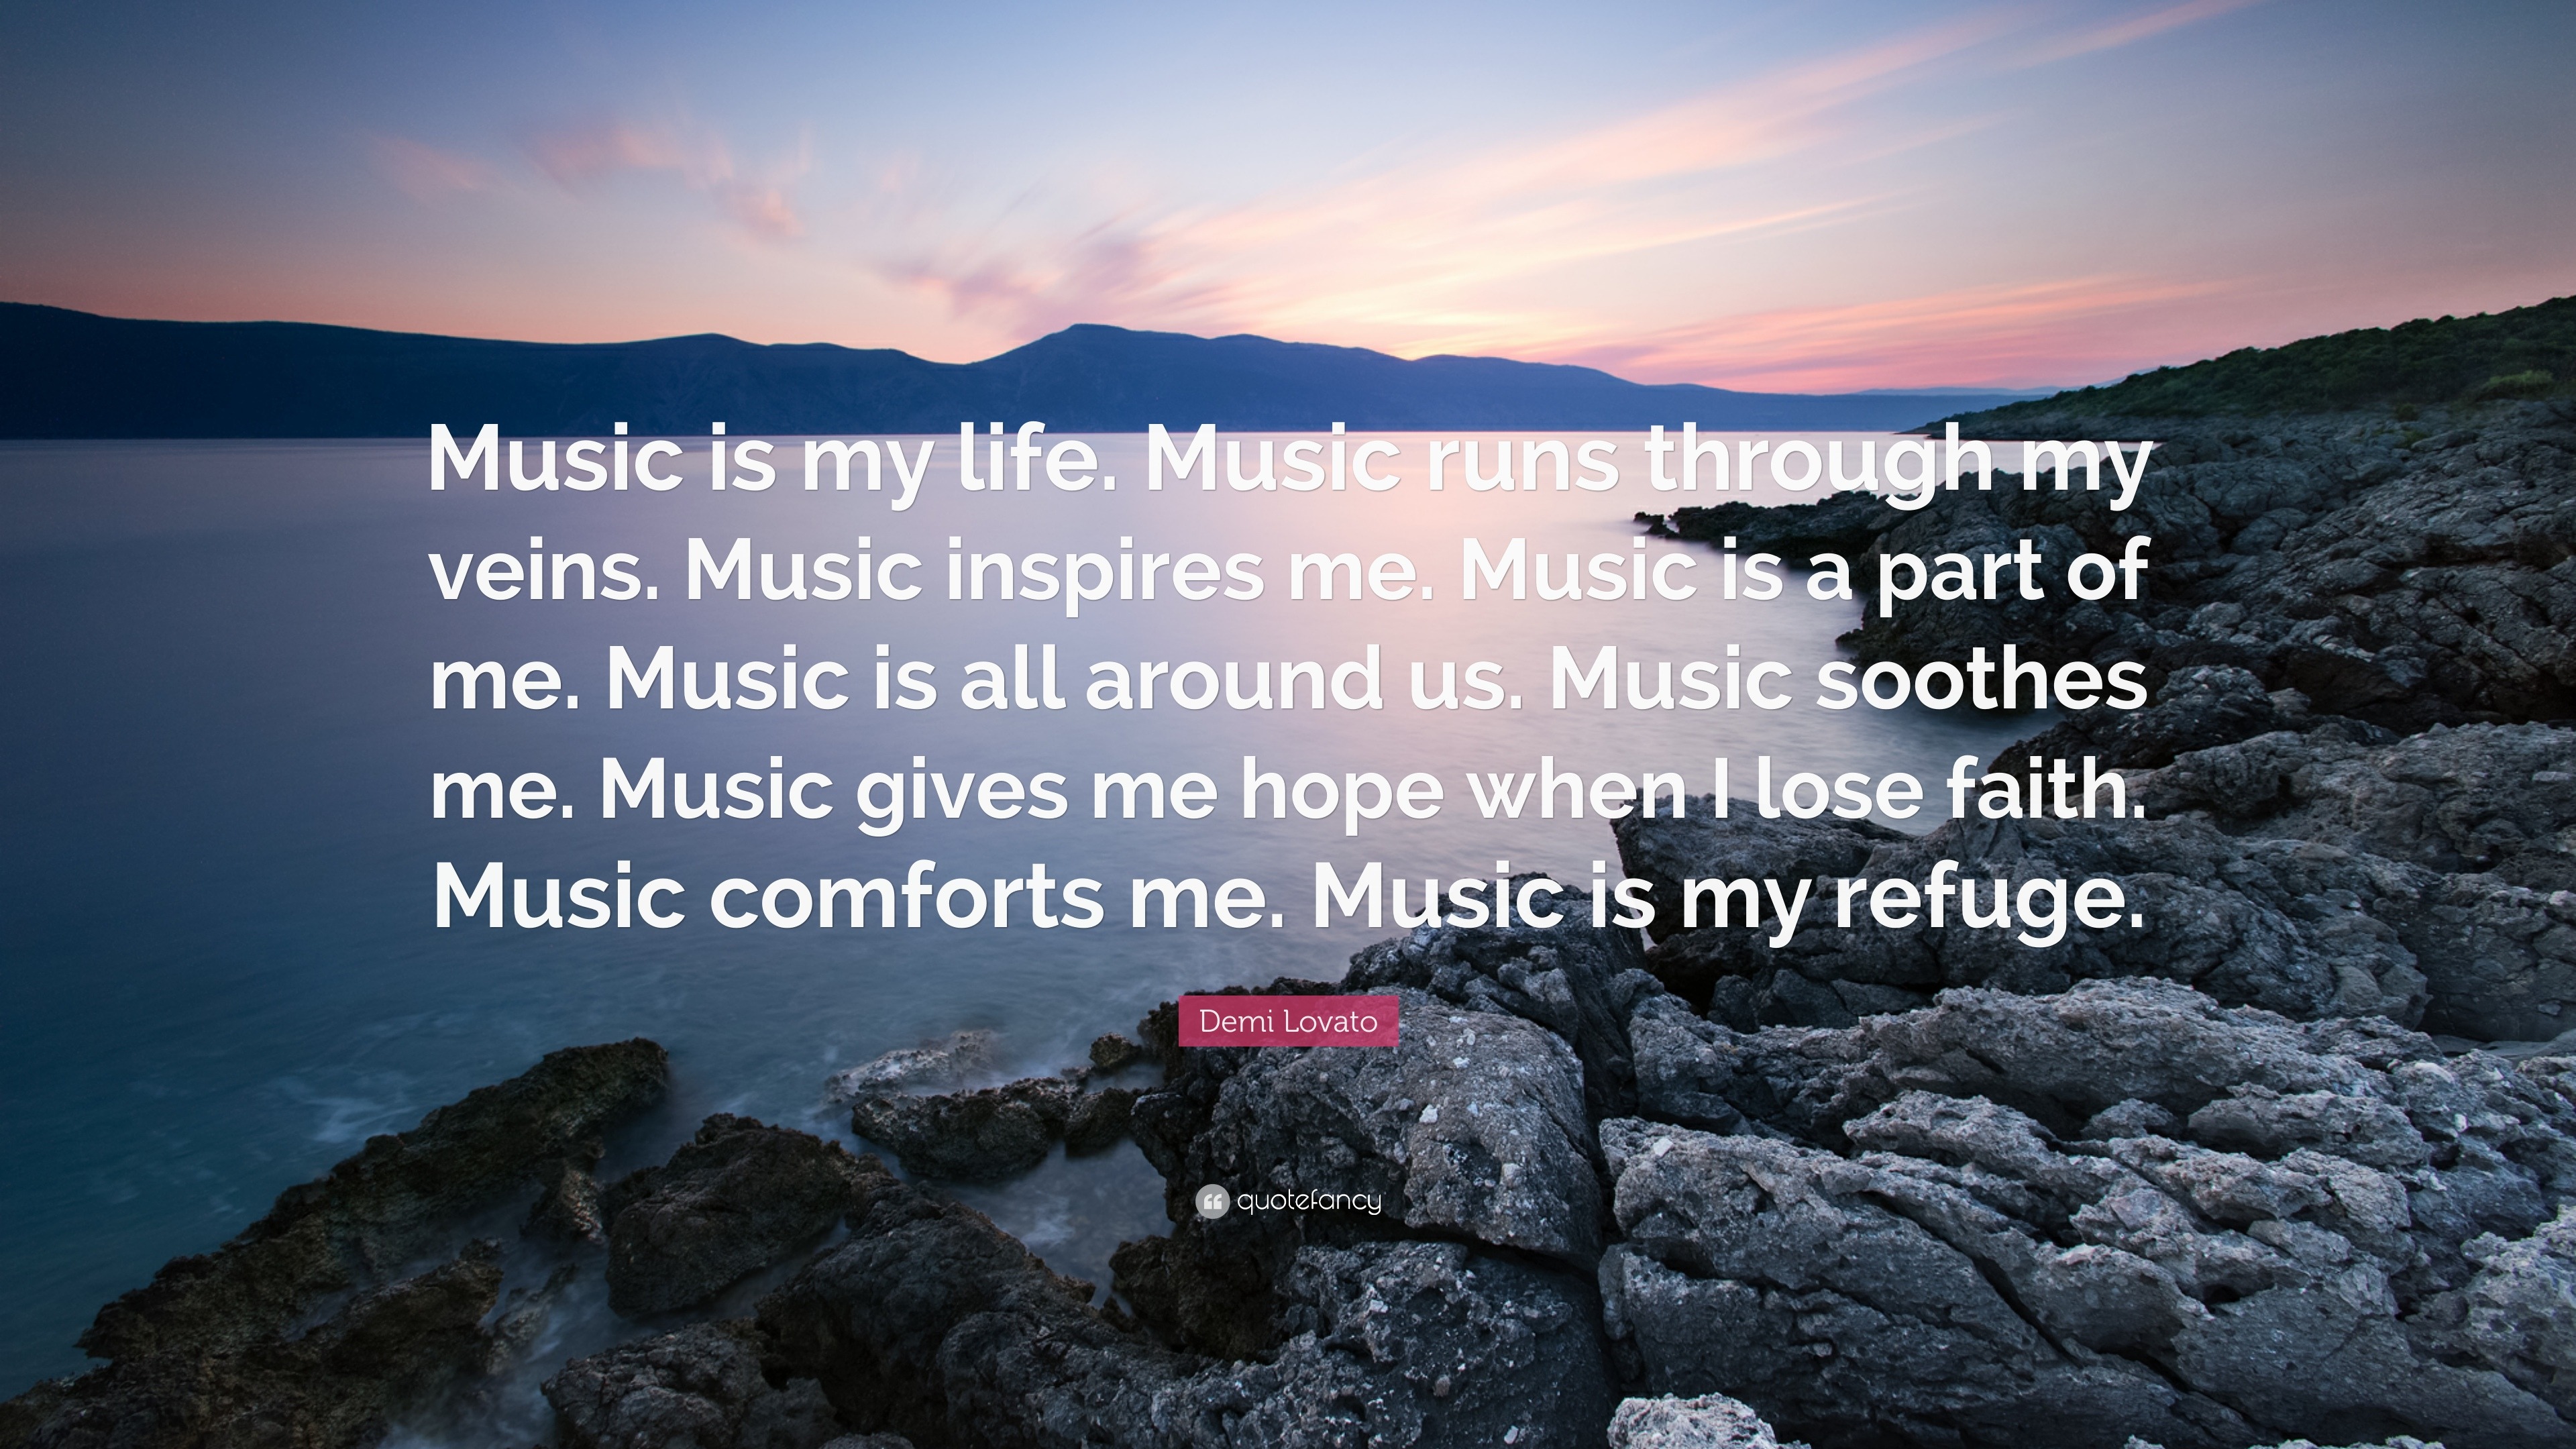 music is my life quotes Famous music is my life quotes Popular music is my life quotes